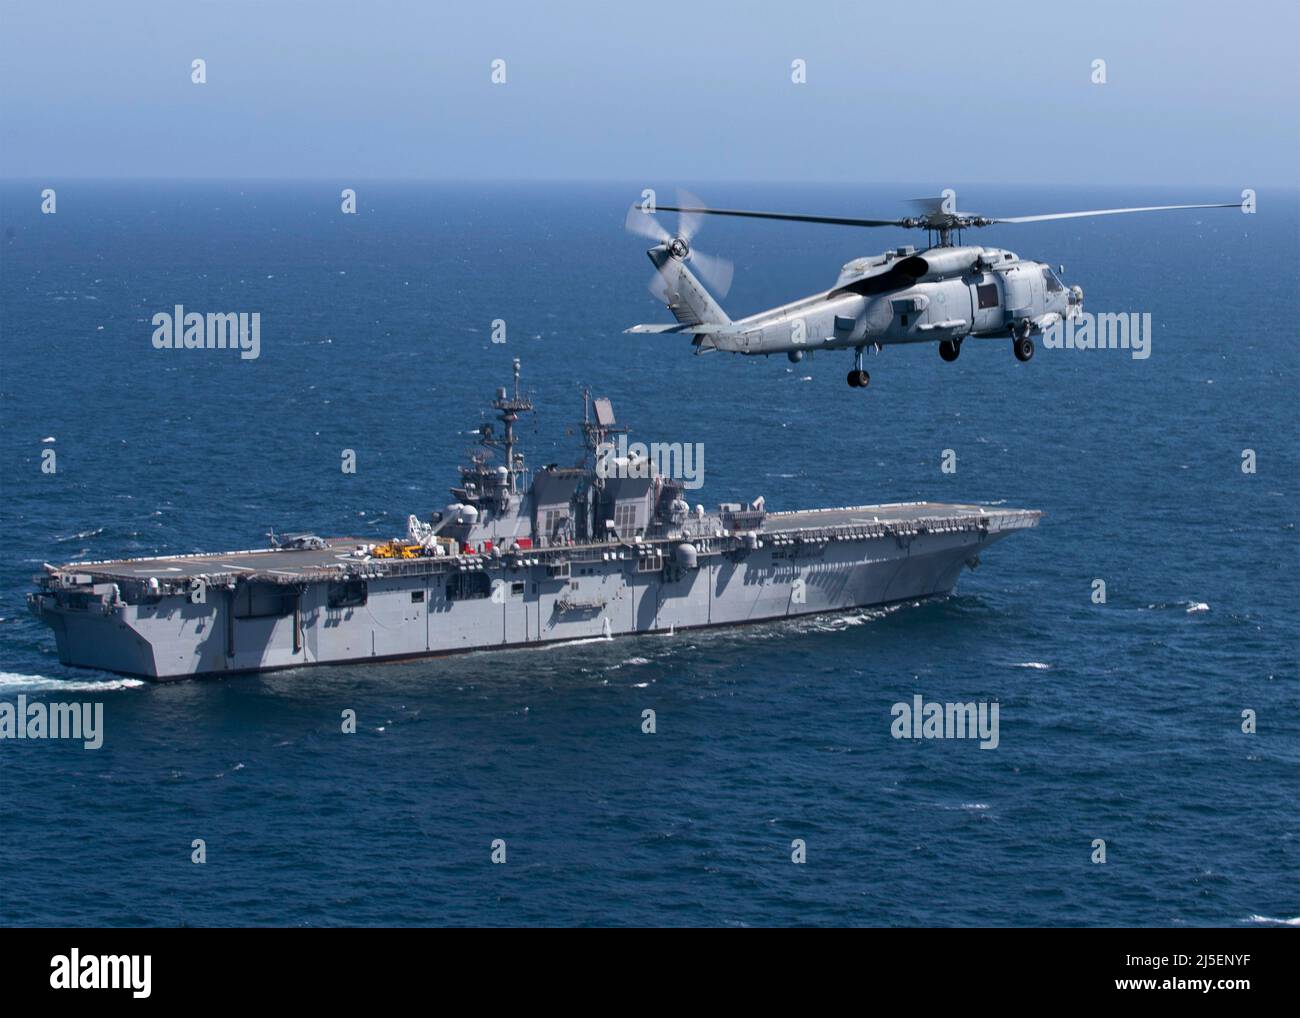 Pacific Ocean, United States. 16 April, 2022. A U.S. Navy MH-60R Sea Hawk helicopter, assigned to Helicopter Maritime Strike Squadron 35, flies past the Wasp-class amphibious assault ship USS Tripoli during routine operations with the 3rd Fleet, April 16, 2021 in the Pacific Ocean.  Credit: MC3 Christopher Sypert/Planetpix/Alamy Live News Stock Photo